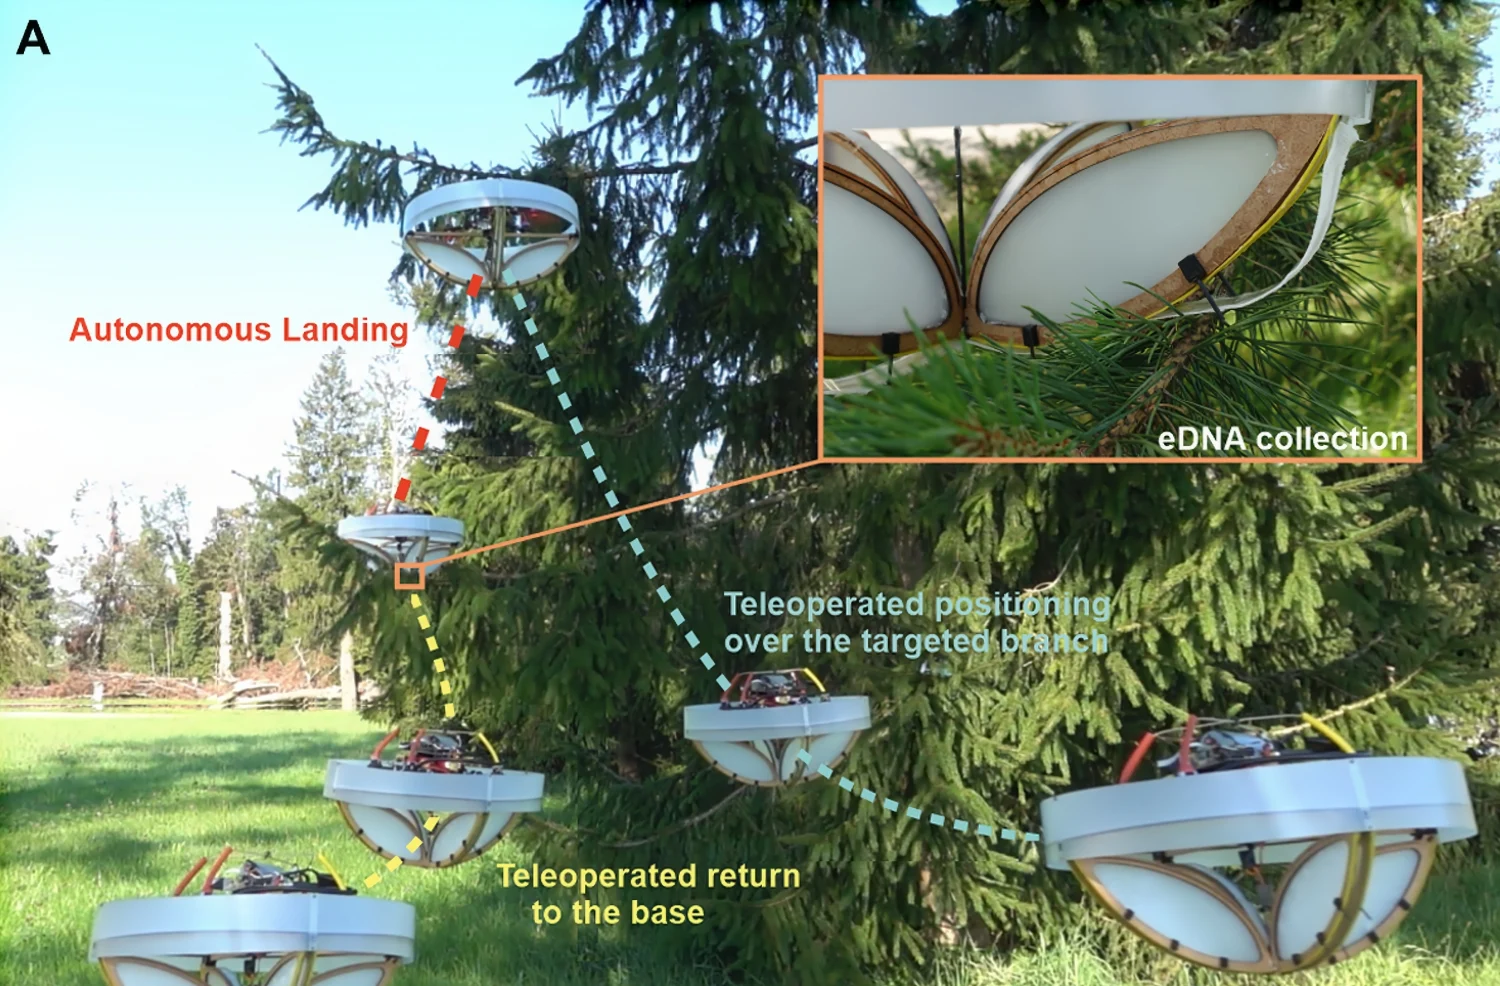 Illustrated diagram showing an eDNA collection drone approaching a tree branch, collecting material and returning to base.